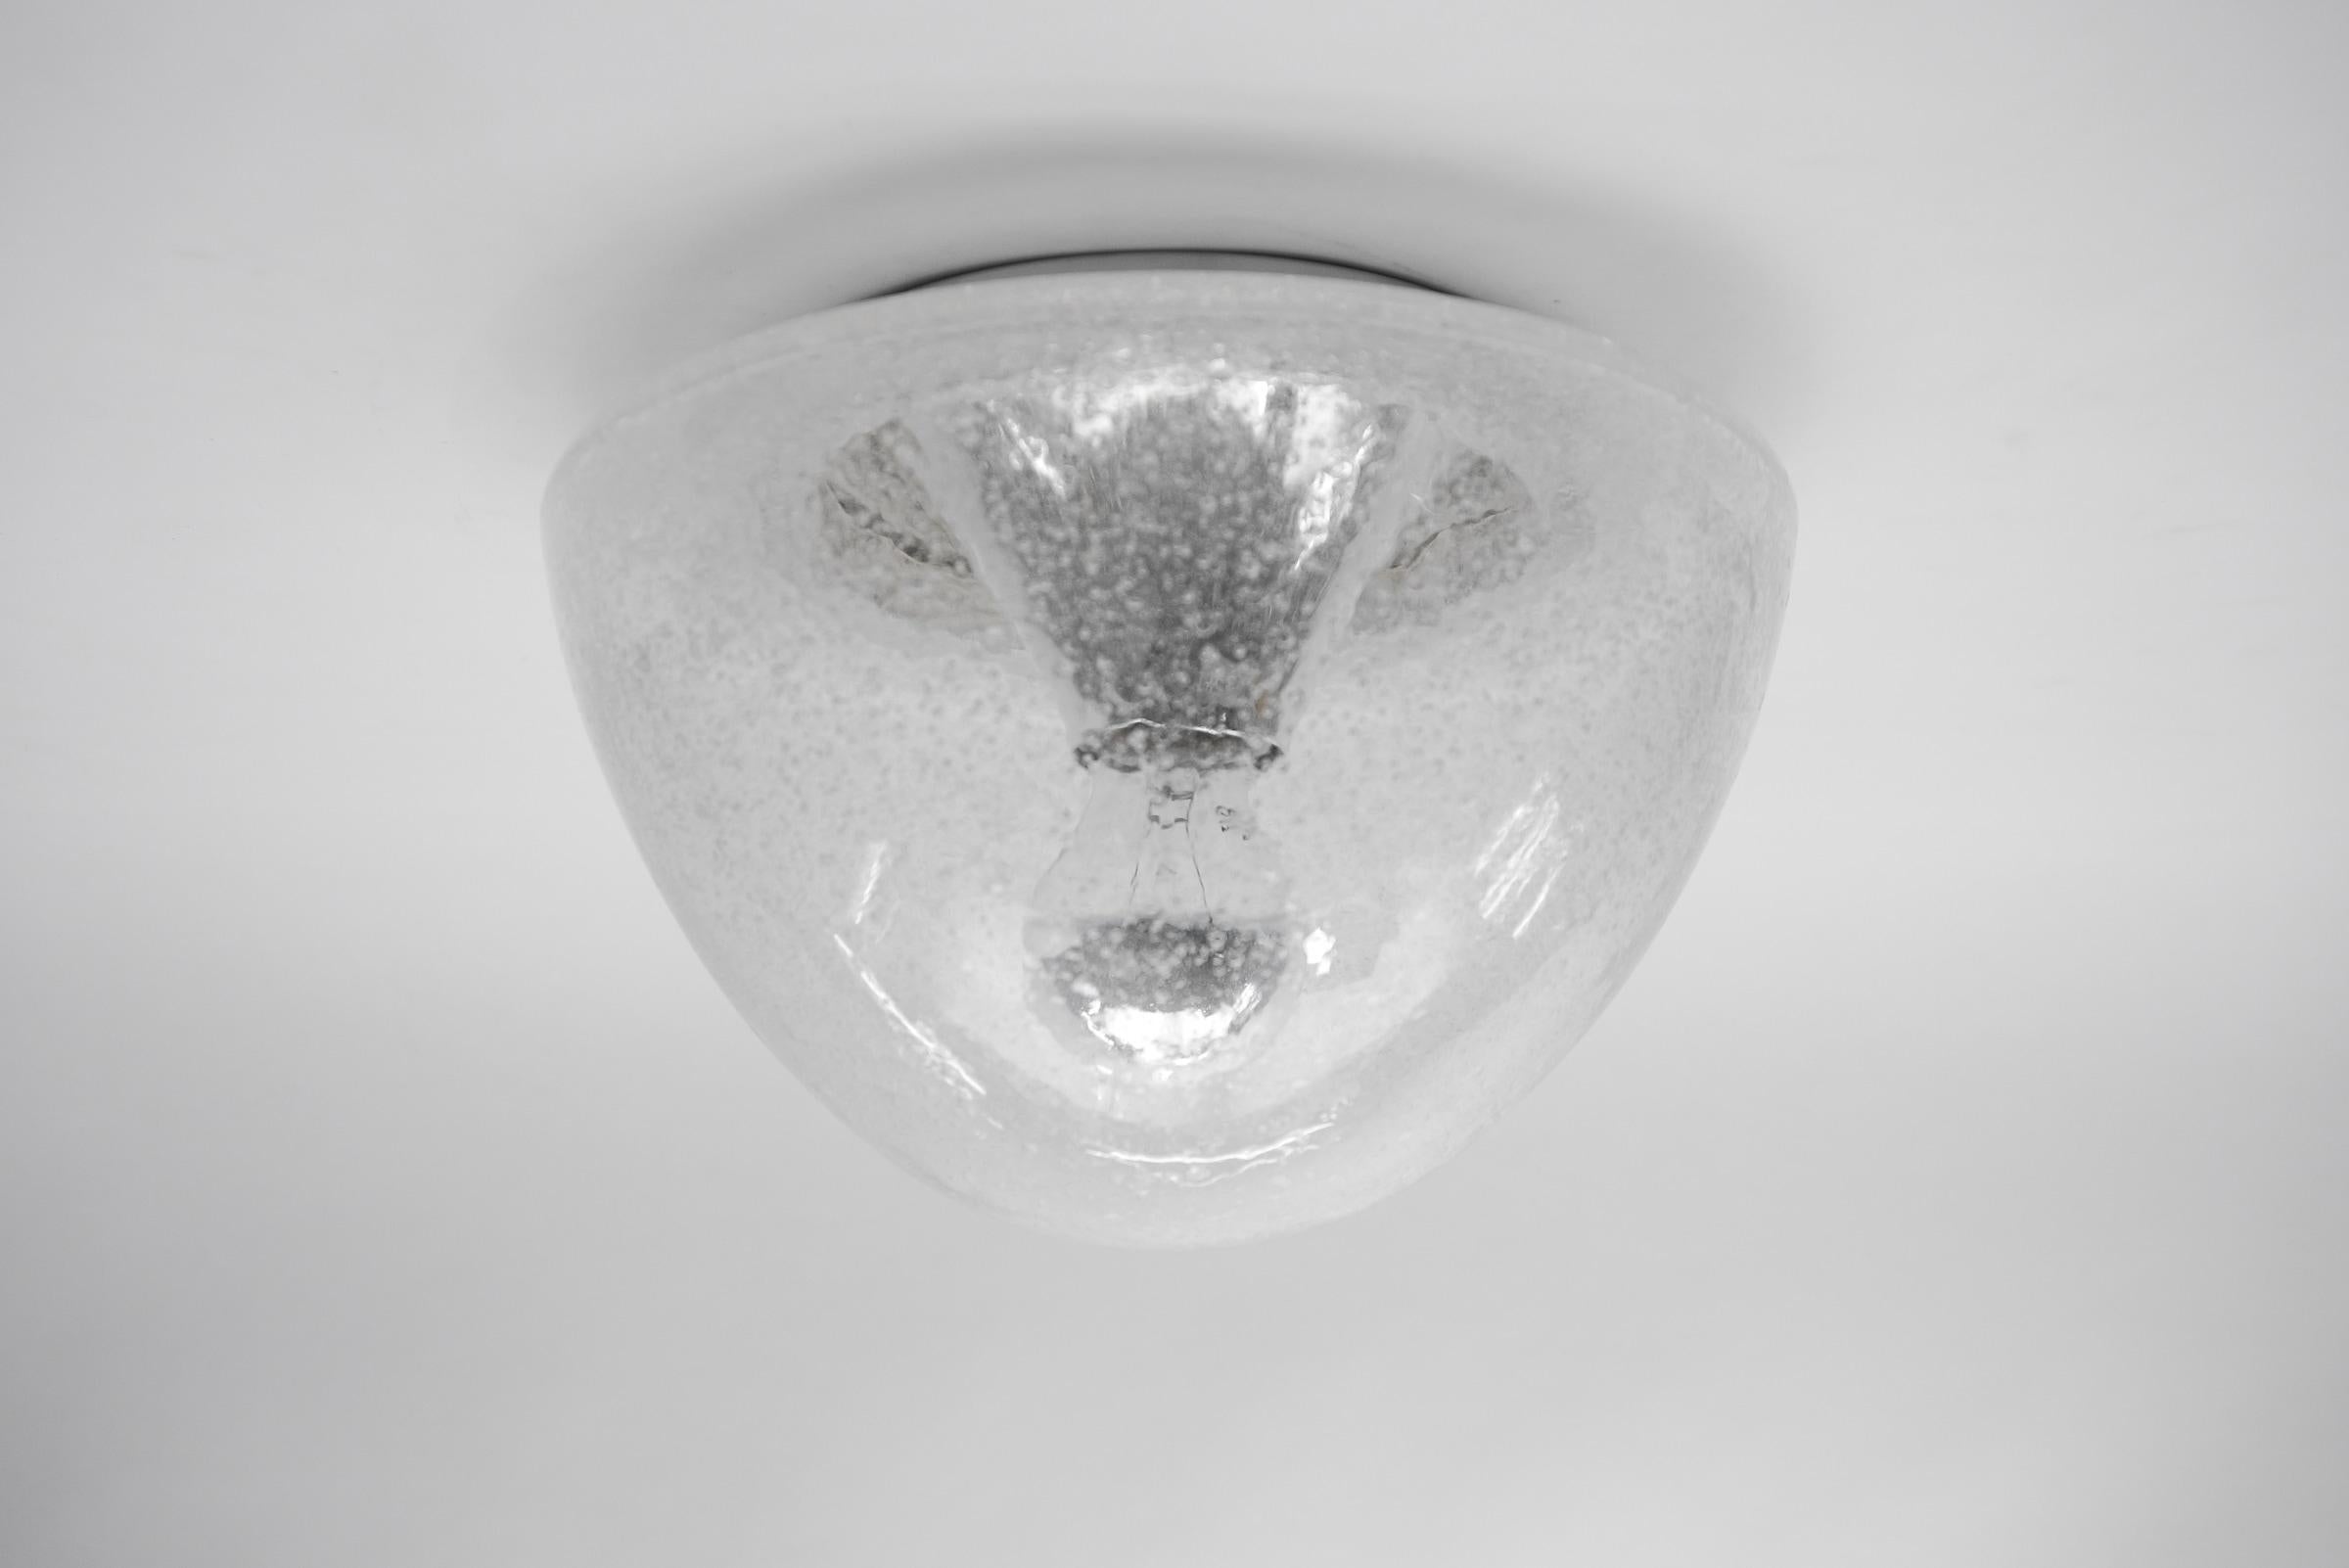 1 of 3 Mushroom Shaped Glass Lamp in Chrome, Germany 1960s

Dimensions
Height: 7.08 in. (18 cm)
Diameter: 10.23 in. (26 cm)

The fixture need 1 x E27 standard bulb with 60W max.

Light bulbs are not included.
It is possible to install this fixture